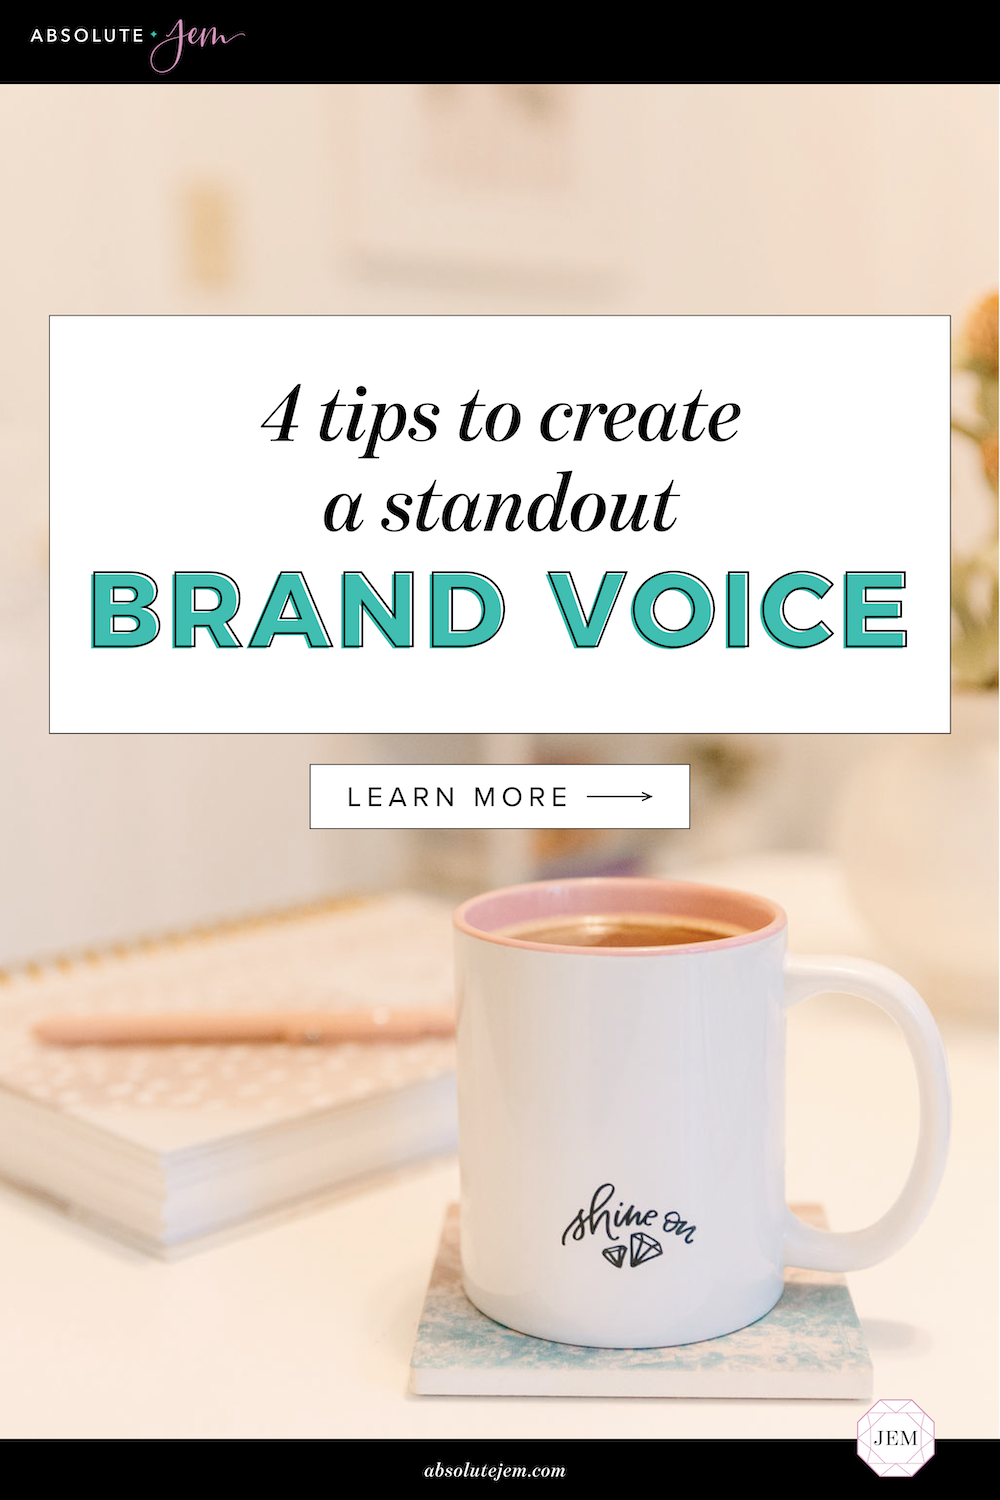 4 Tips to Create a Standout Brand Voice